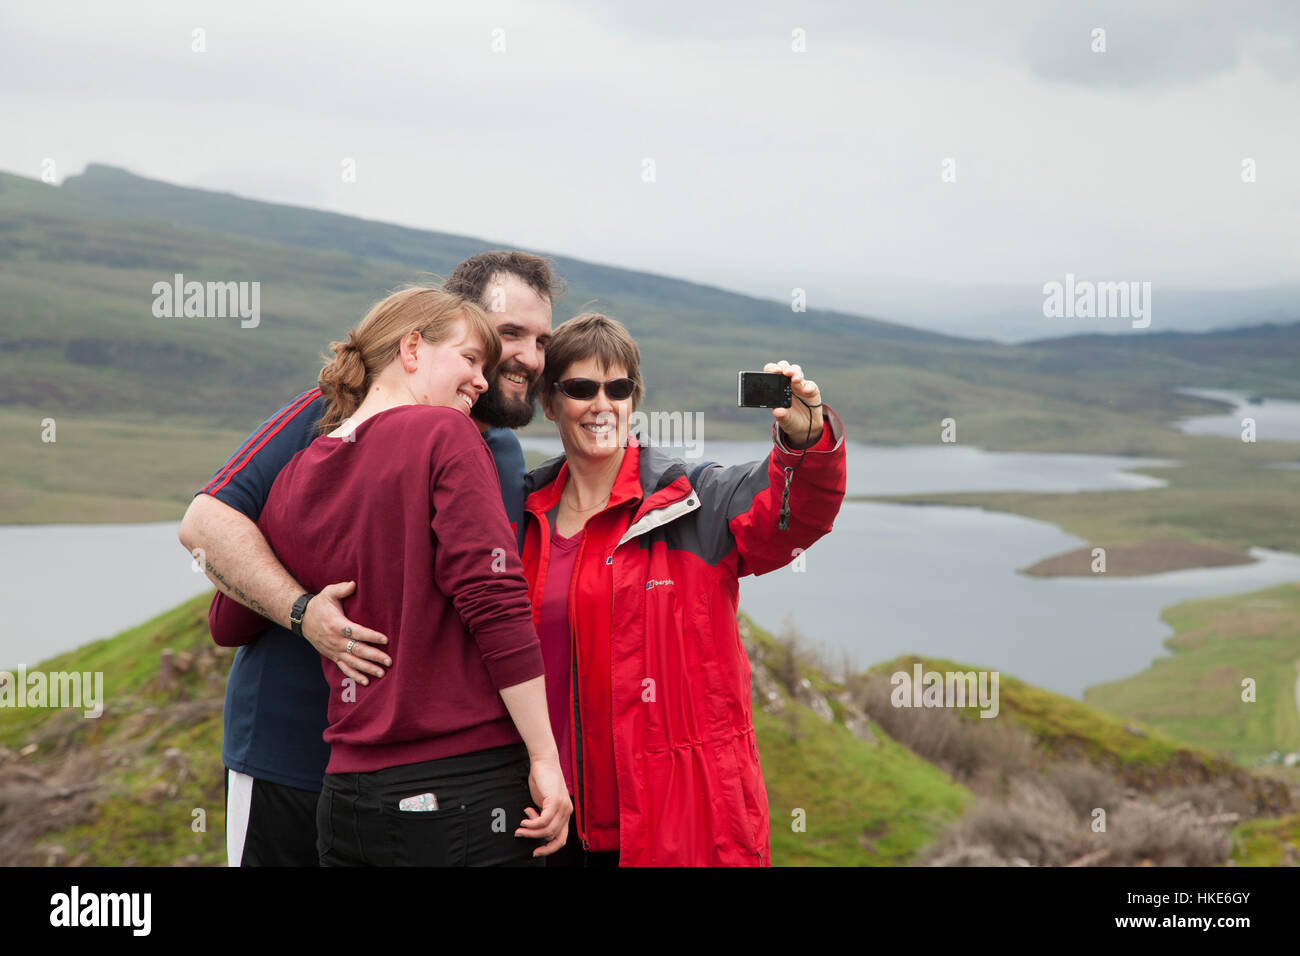 Tourists taking photo of themself in scotland, Hebrides Stock Photo